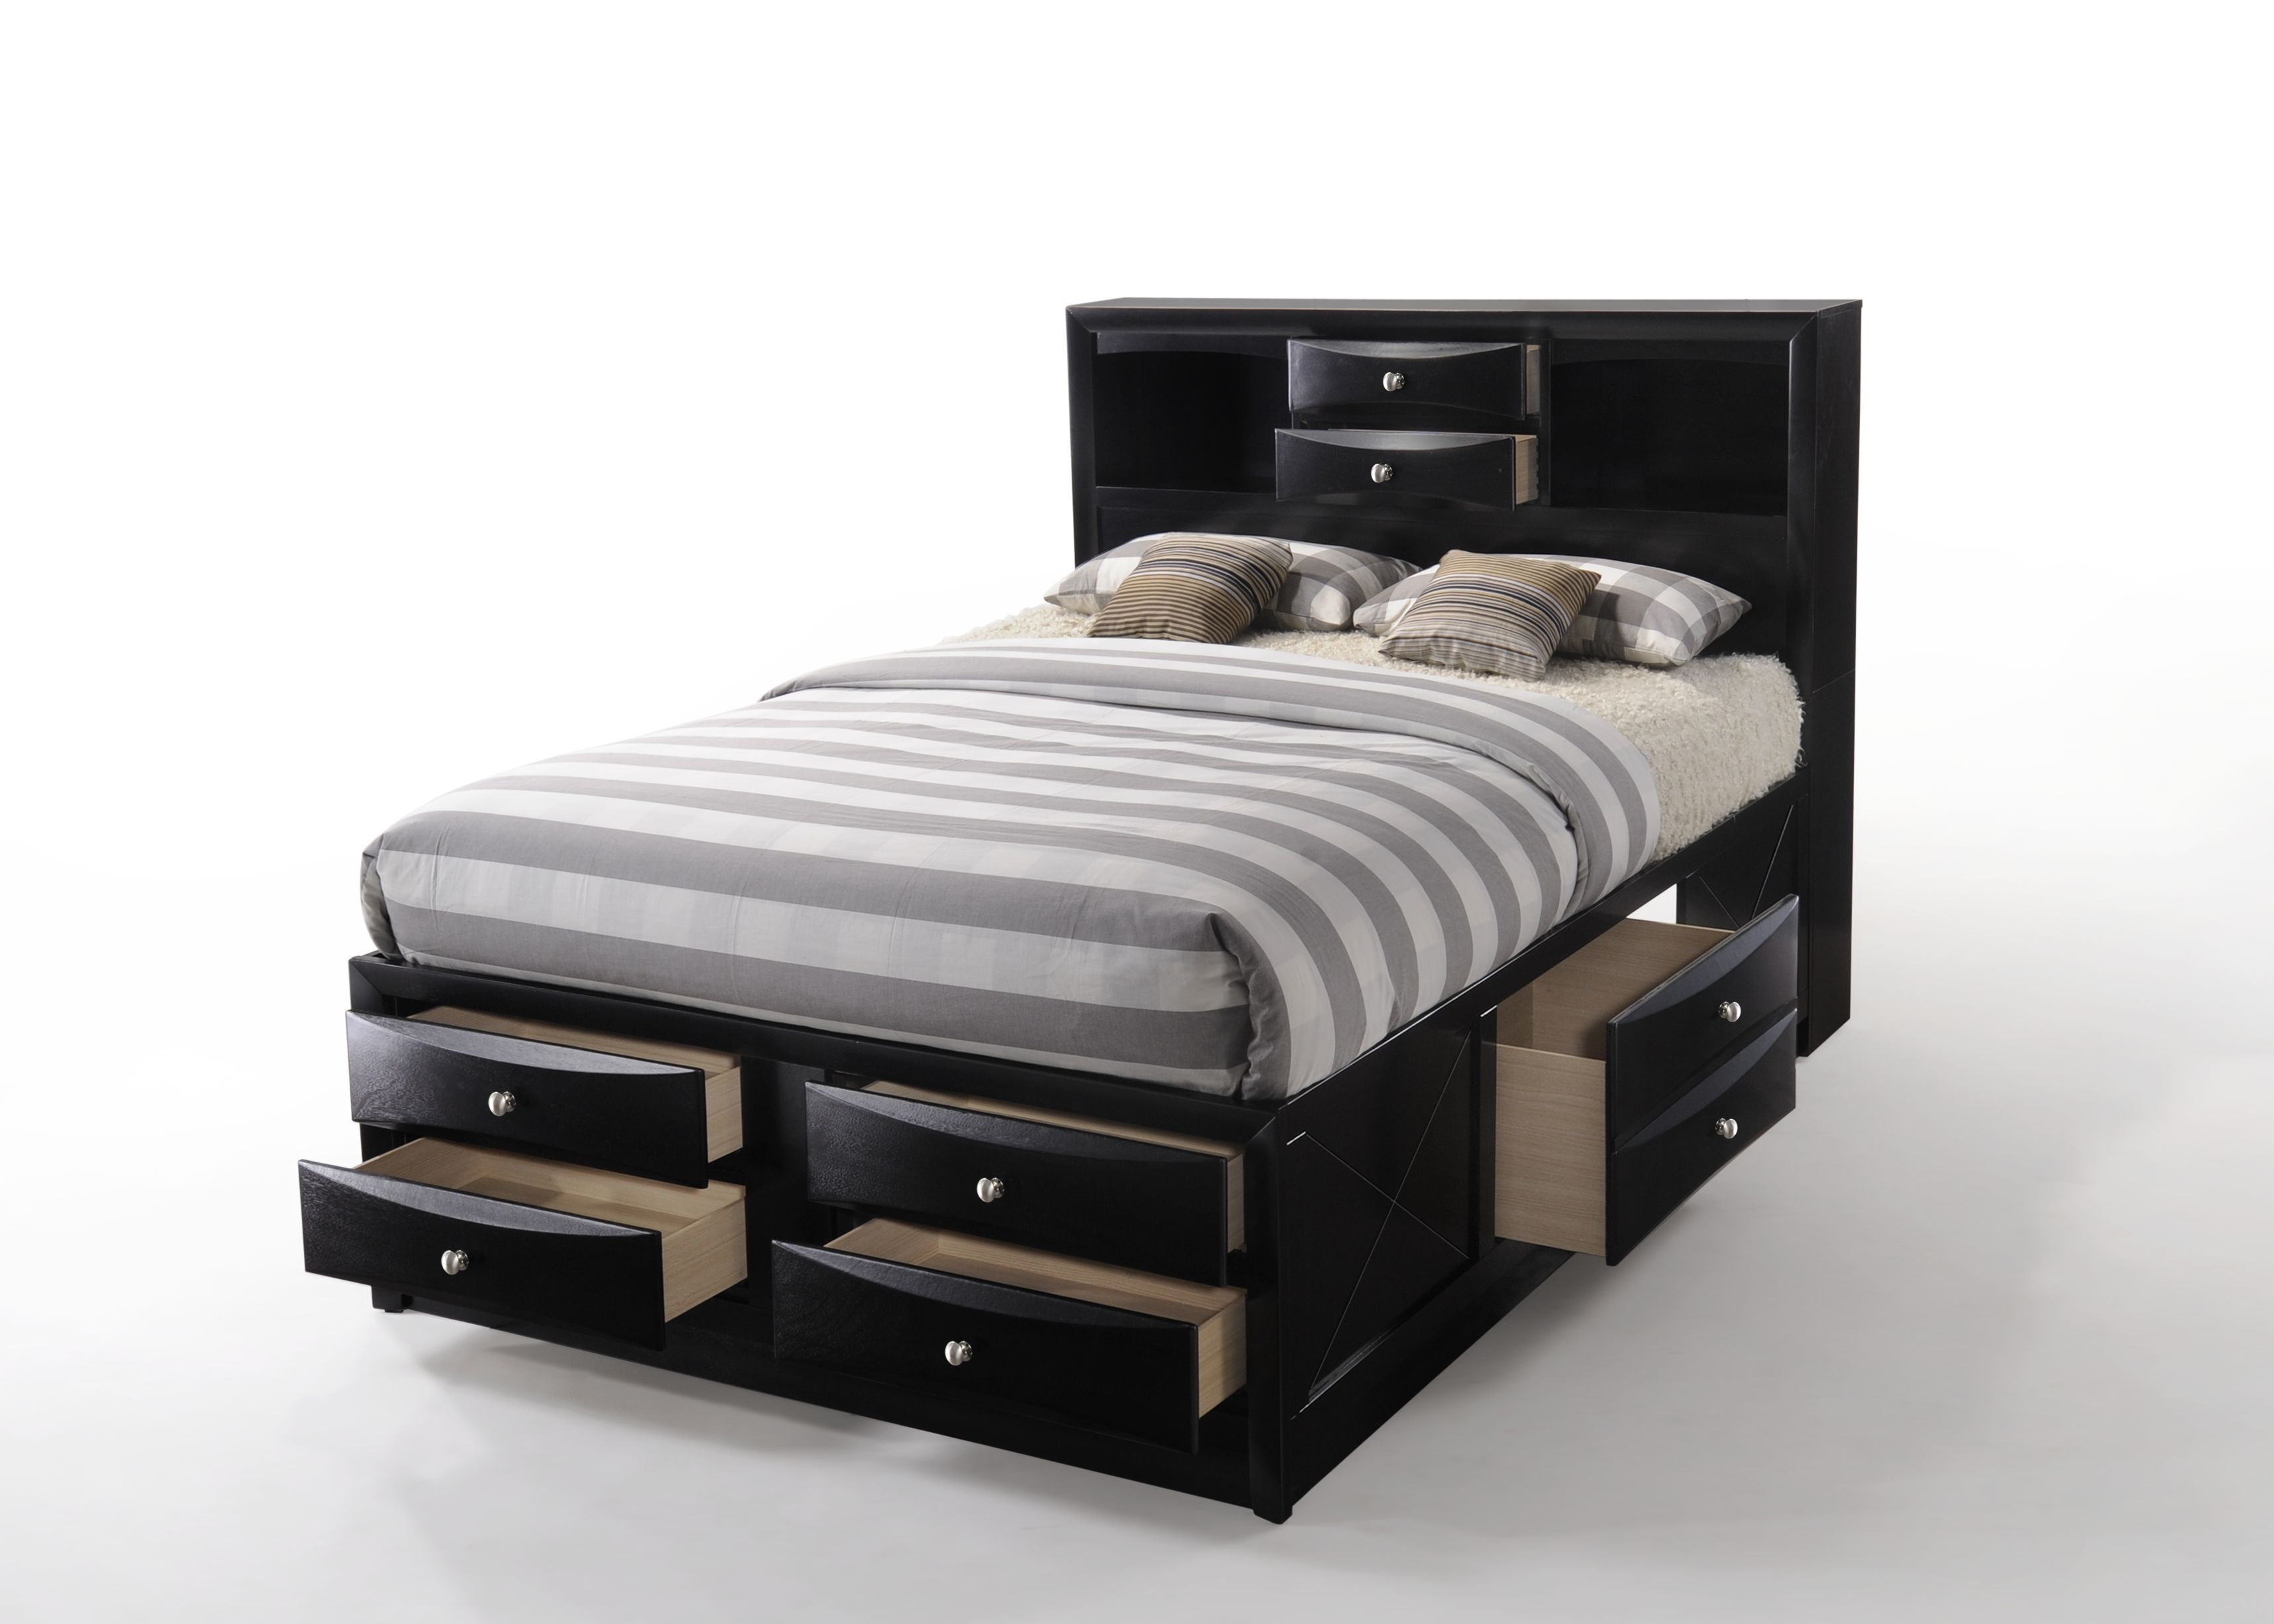 Miekor Furniture Ireland Full Bed in Black - image 5 of 6